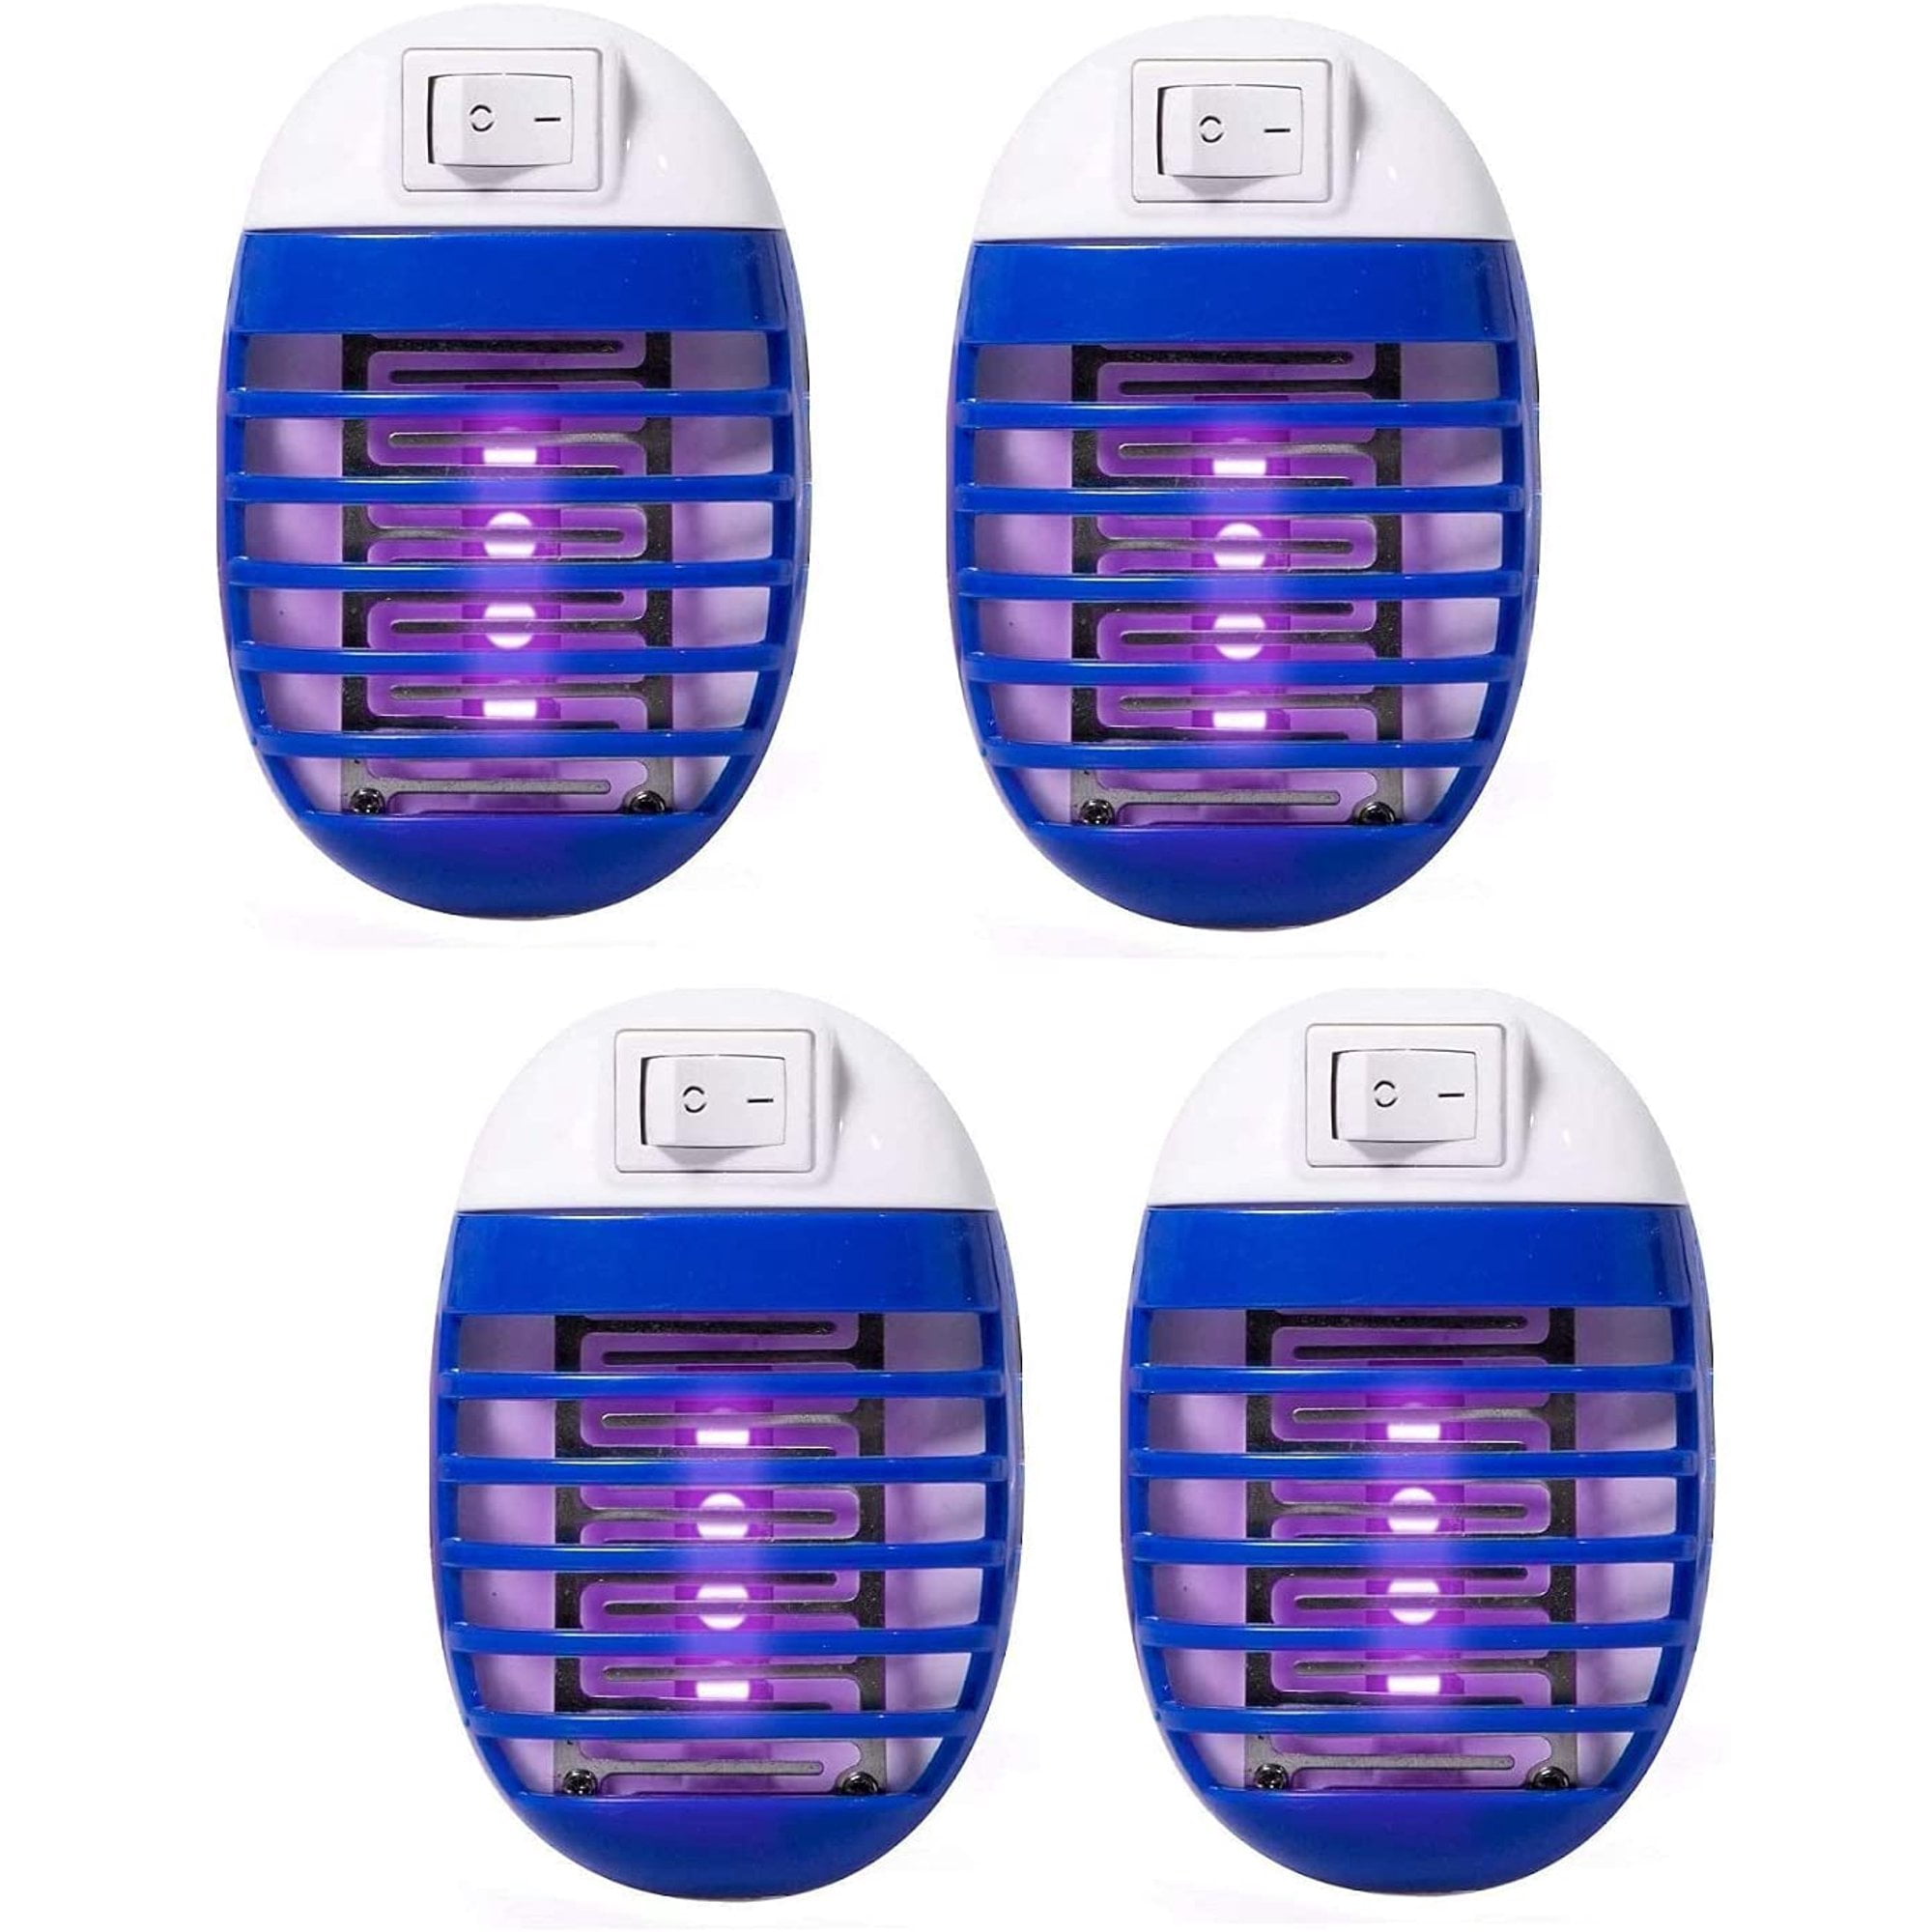 Indoor Insect Killer, Plug-in Bug Zapper Electric Mosquito Killer